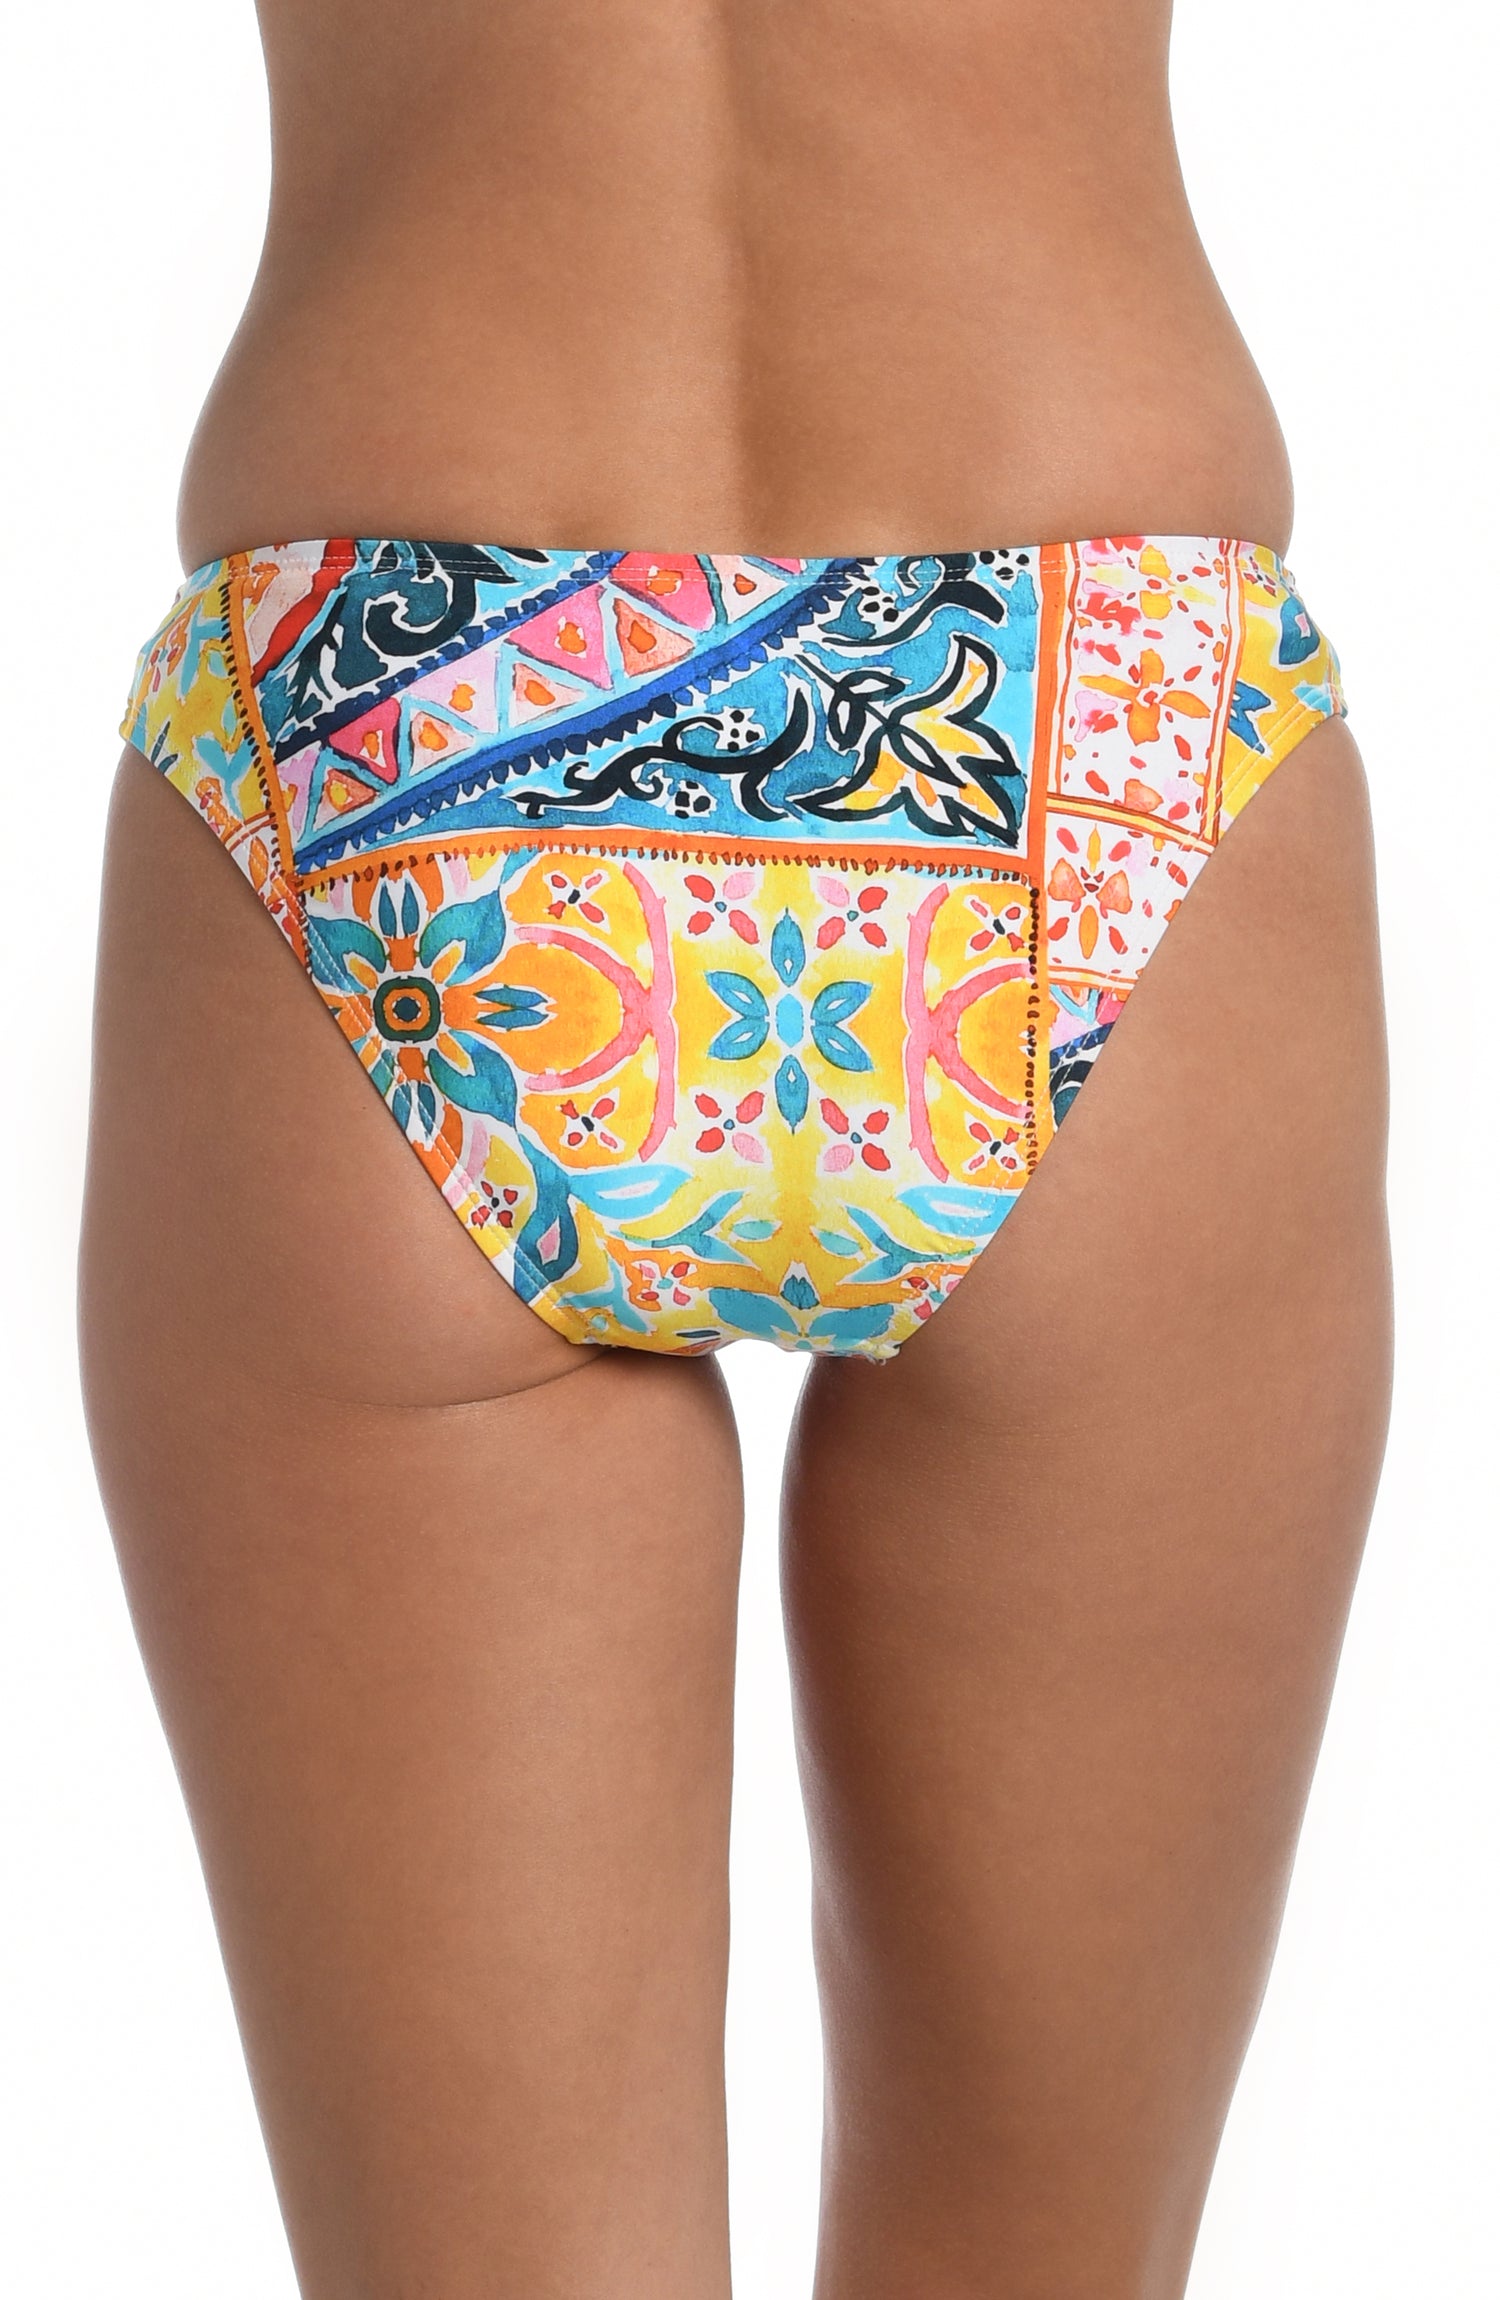 Model is wearing a moroccan inspired multi colored printed hipster bottom from our Soleil collection!